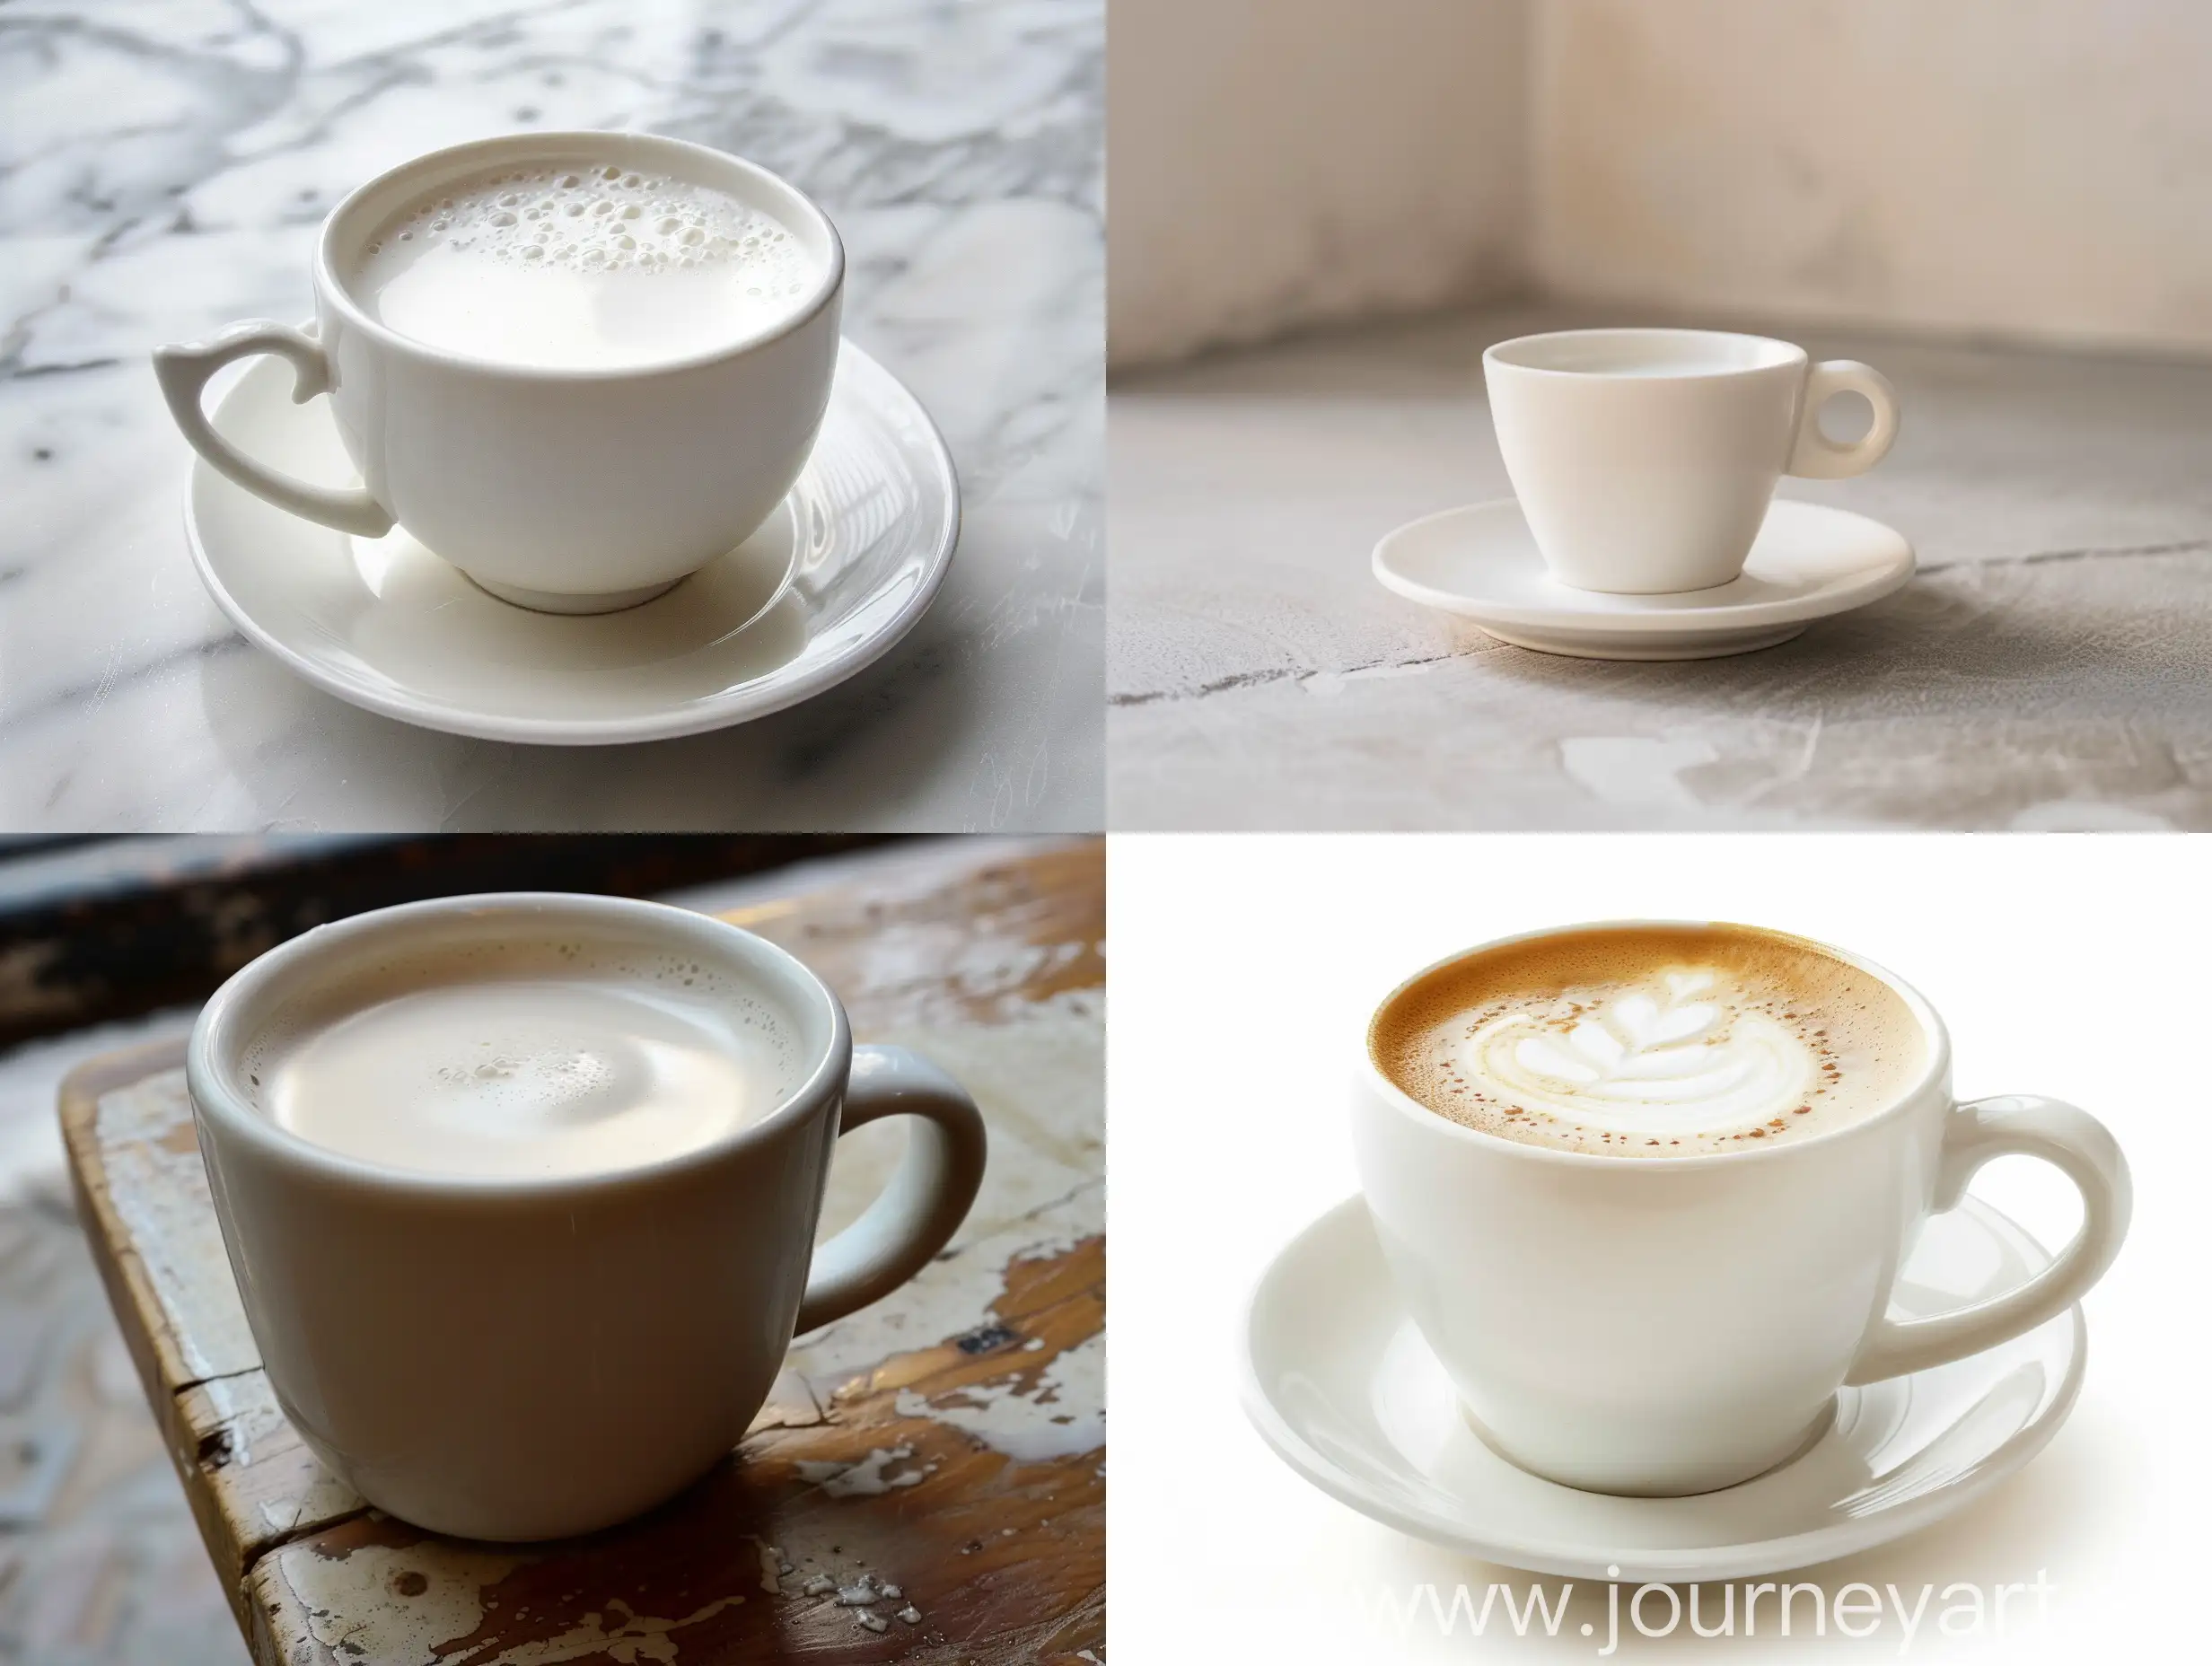 Steaming-Cup-of-Latte-on-Vintage-Saucer-Artistic-Beverage-Photography